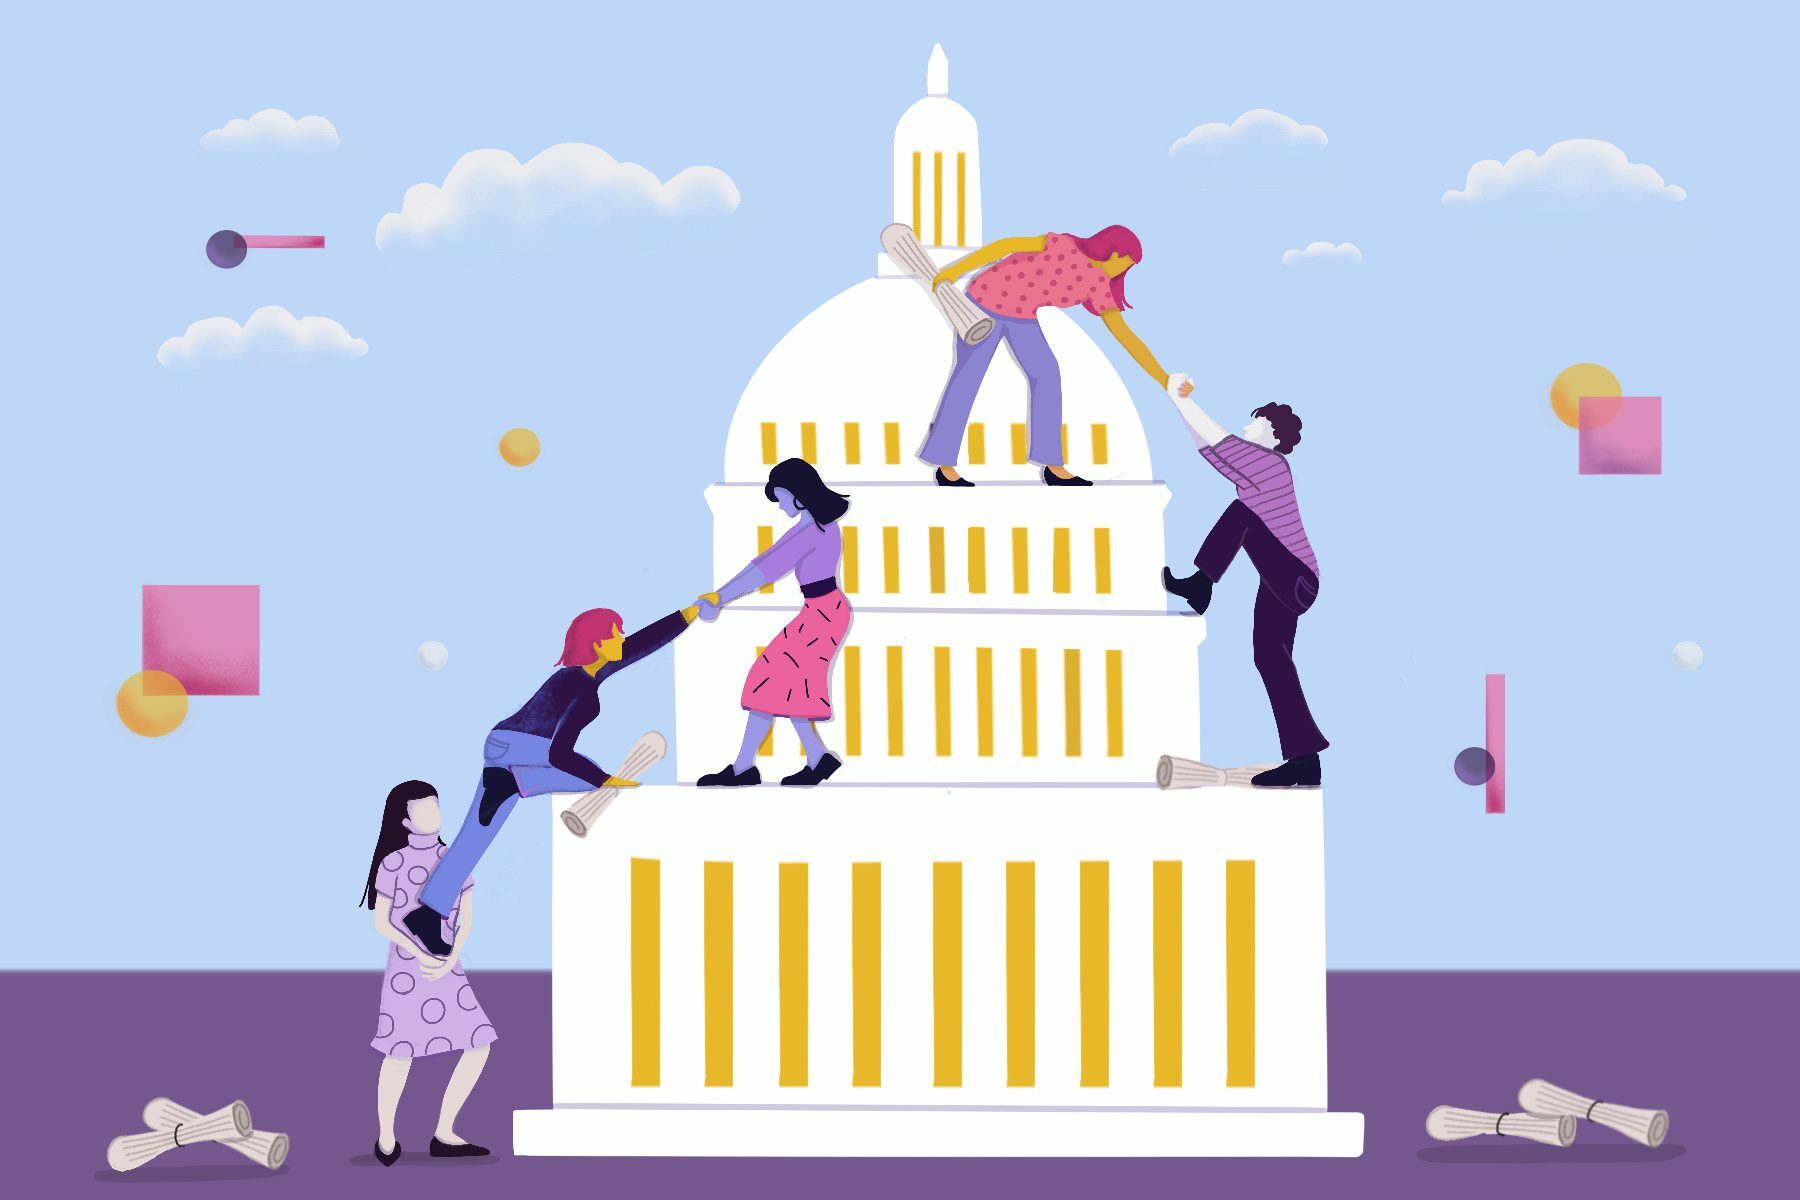 An illustration of people climbing congress in support of bipartisan bills.